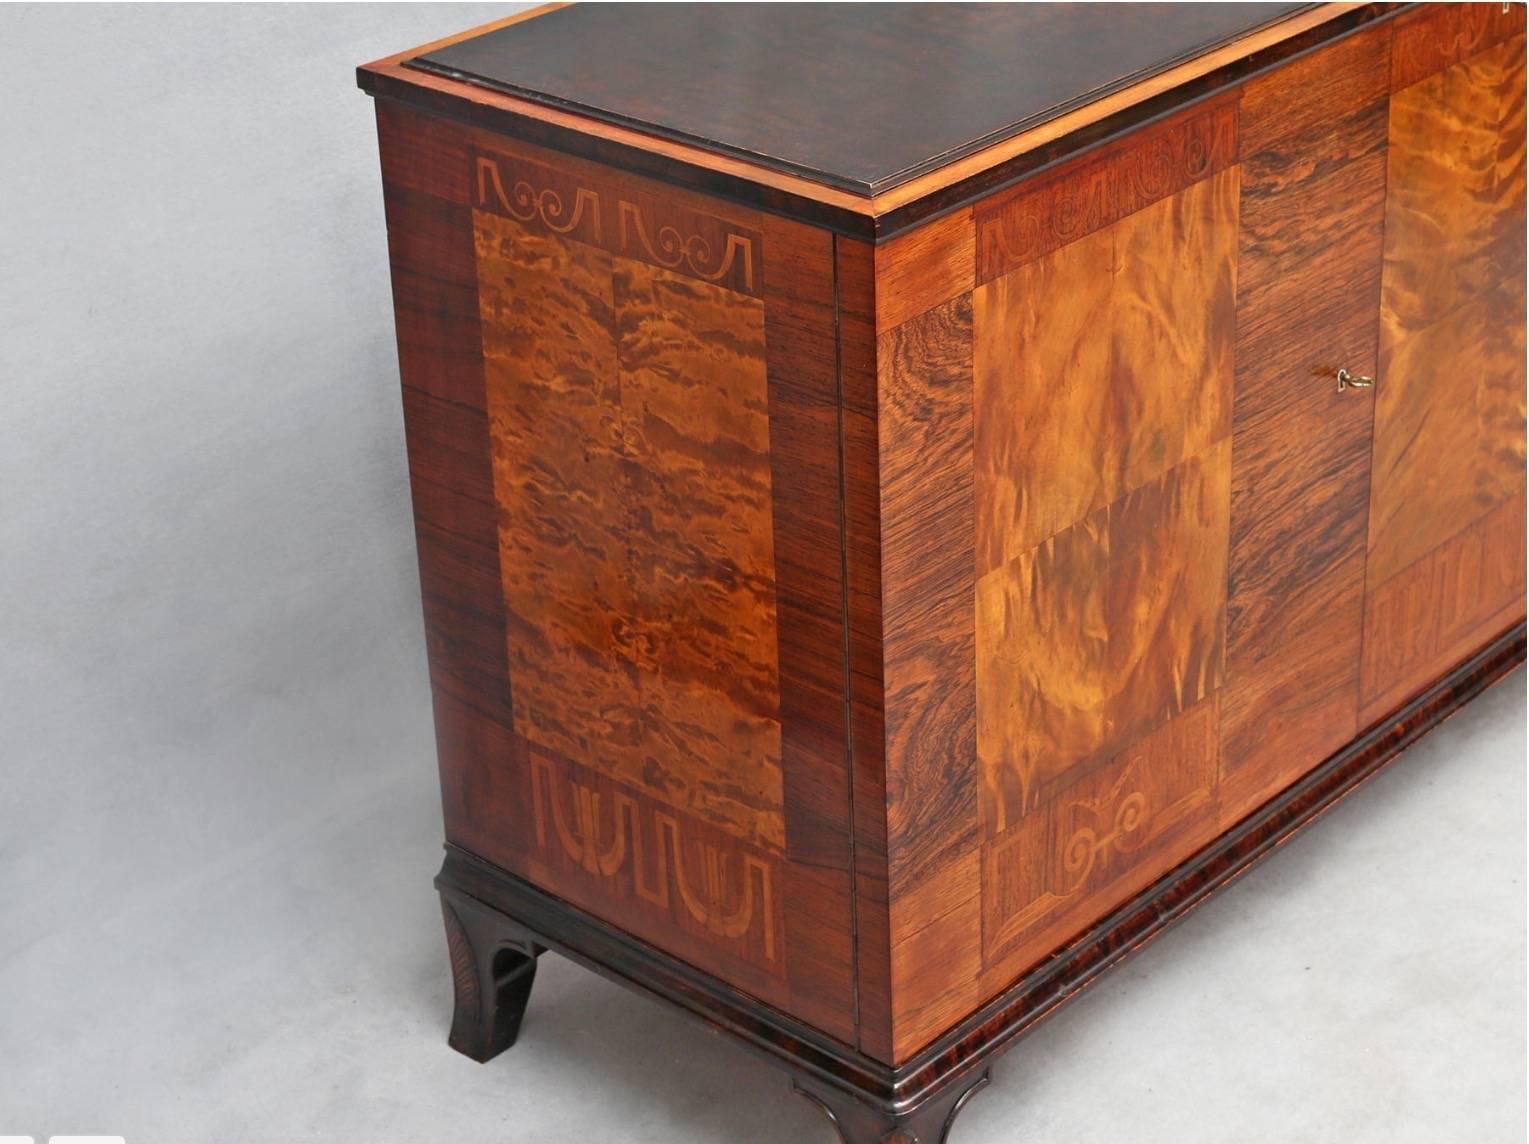 Swedish Art Deco inlaid sideboard cabinet by Erik Chambert, circa 1930. Rendered in golden flame birch and rosewood with mixed wood neo-classically themed inlay. Ebonized details on base and moldings. Interior consists of two small drawers, A